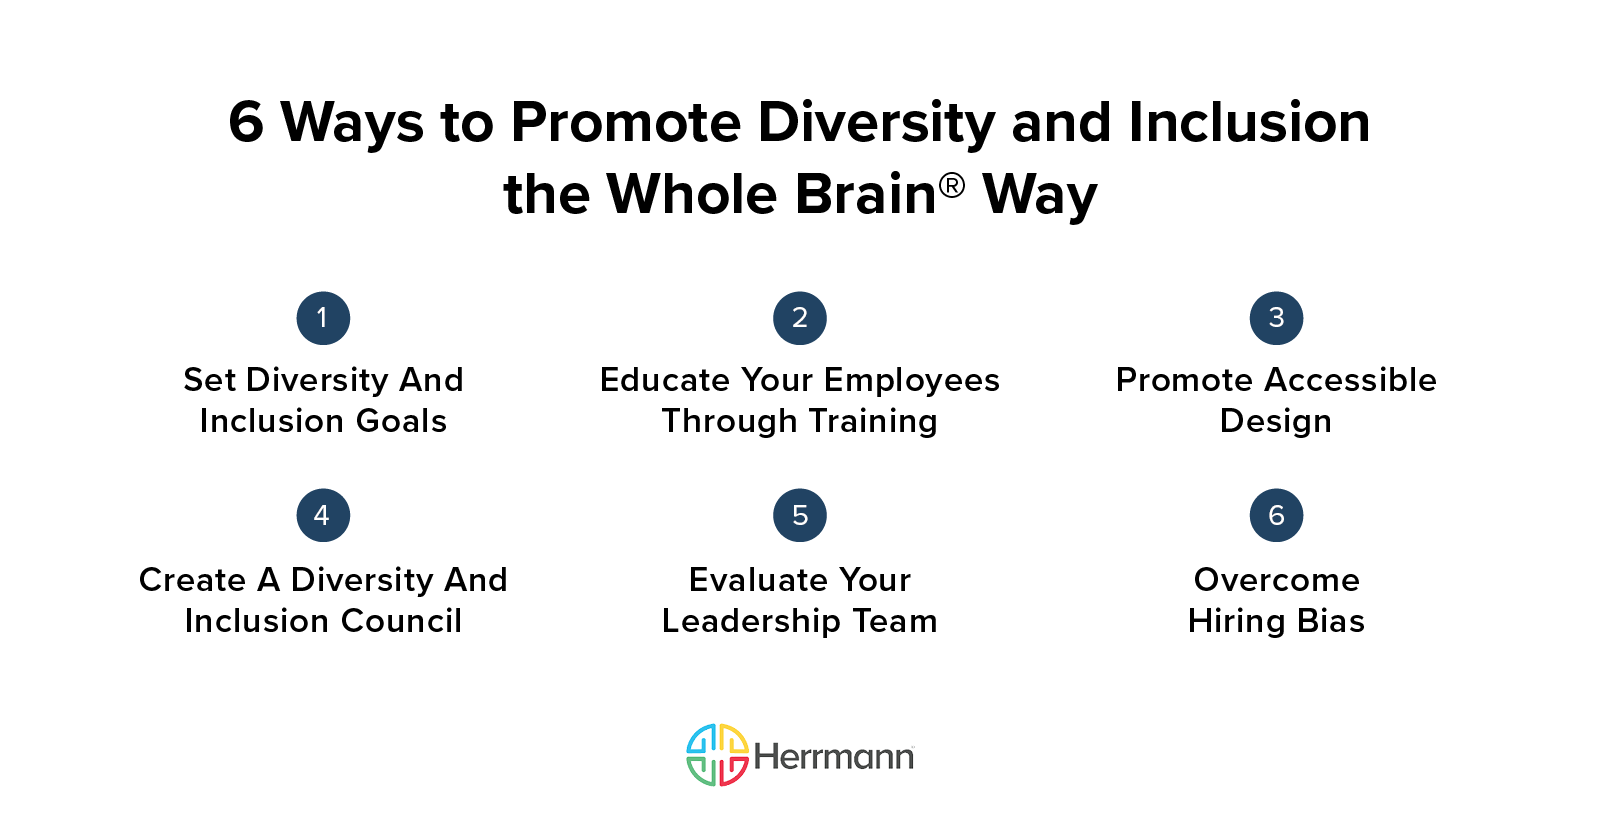 Companies perform better if they're more inclusive: Take these 3 steps